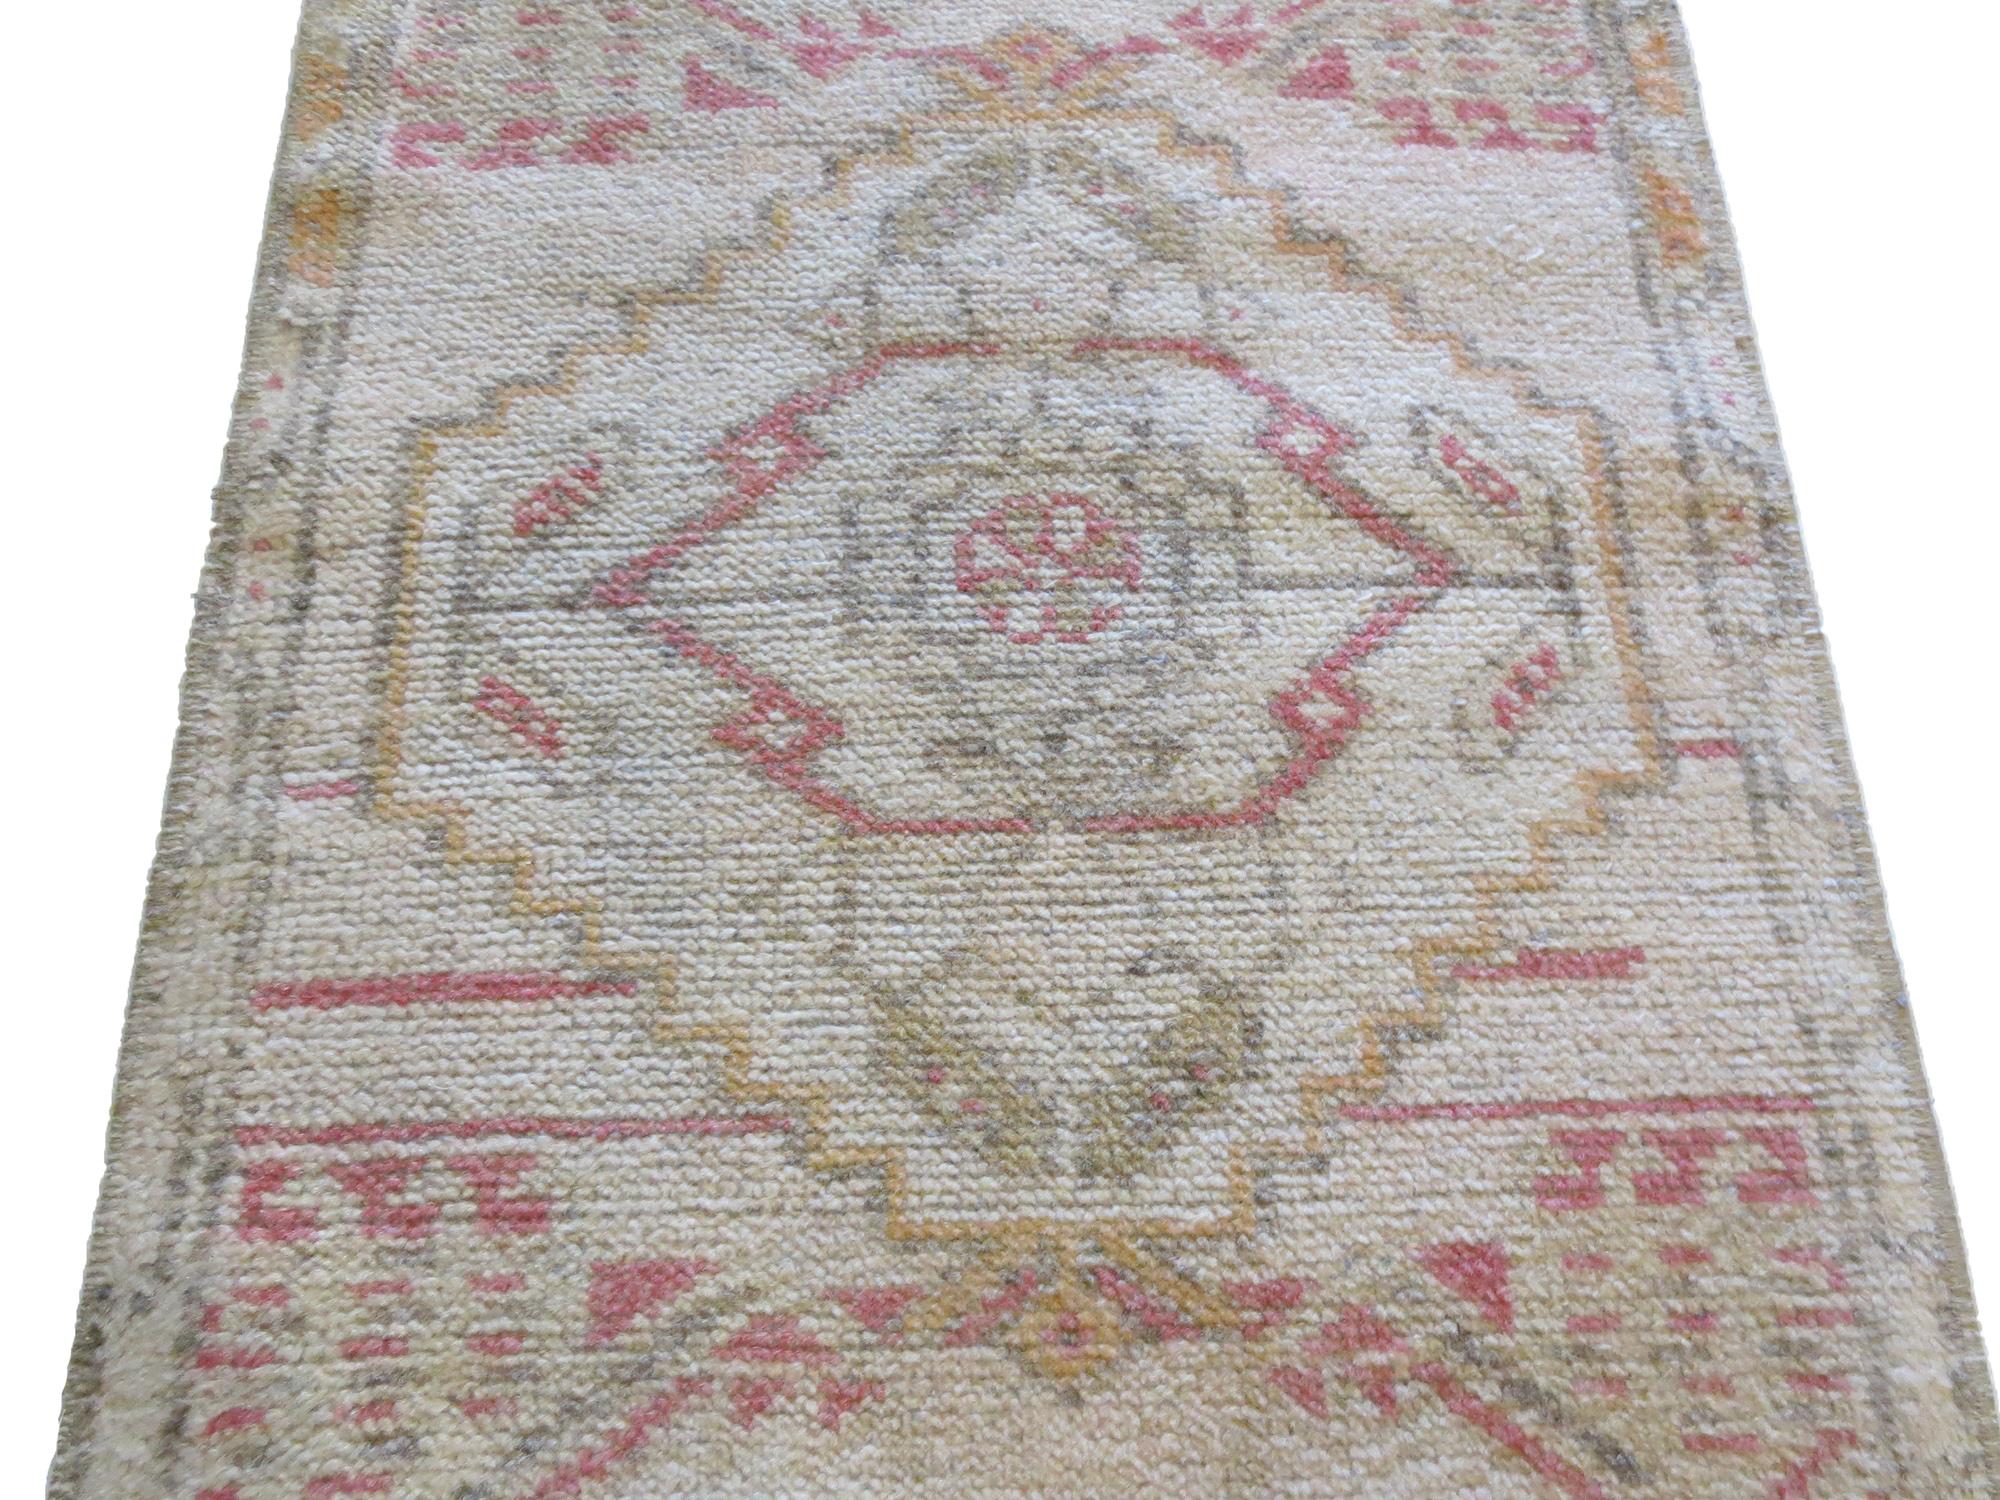 This is a vintage Swedish flat-woven runner from the mid-20th century.